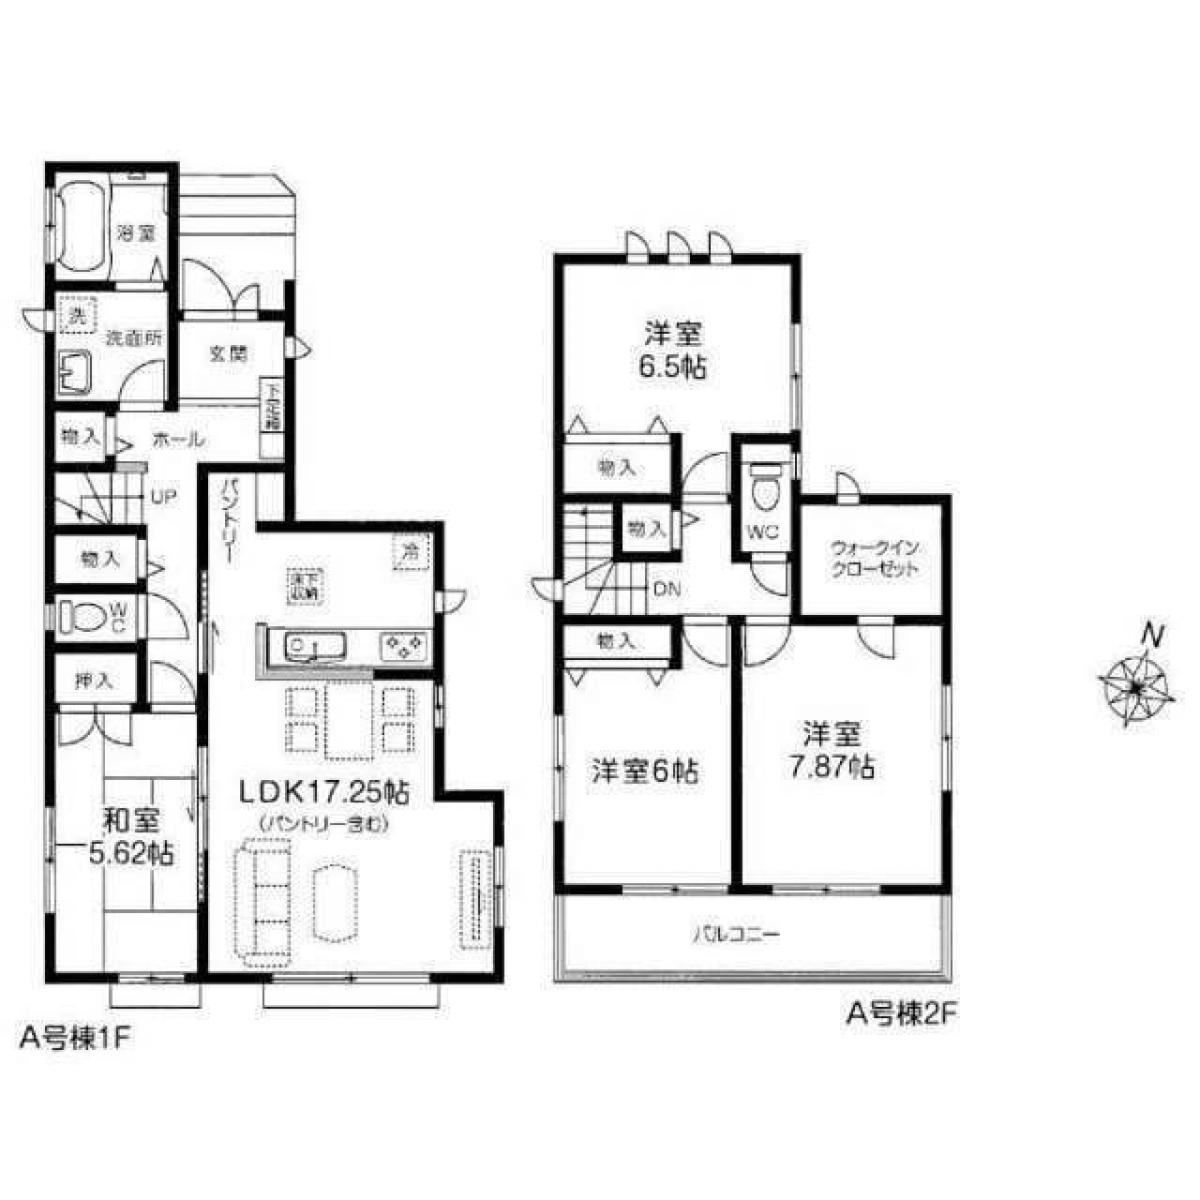 Picture of Home For Sale in Nagareyama Shi, Chiba, Japan